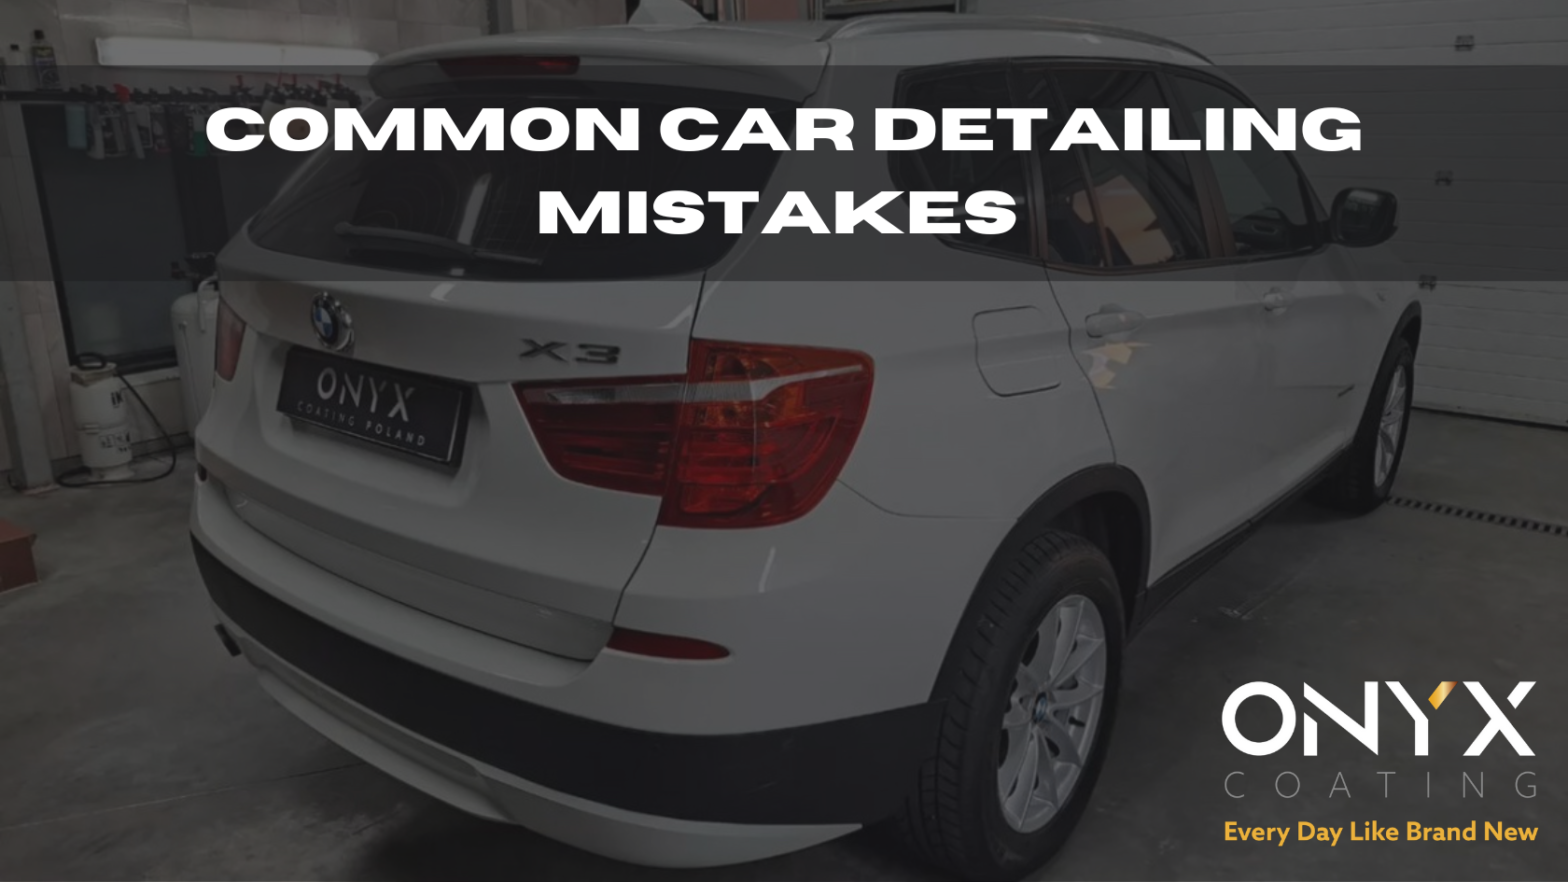 Common car detailing mistakes